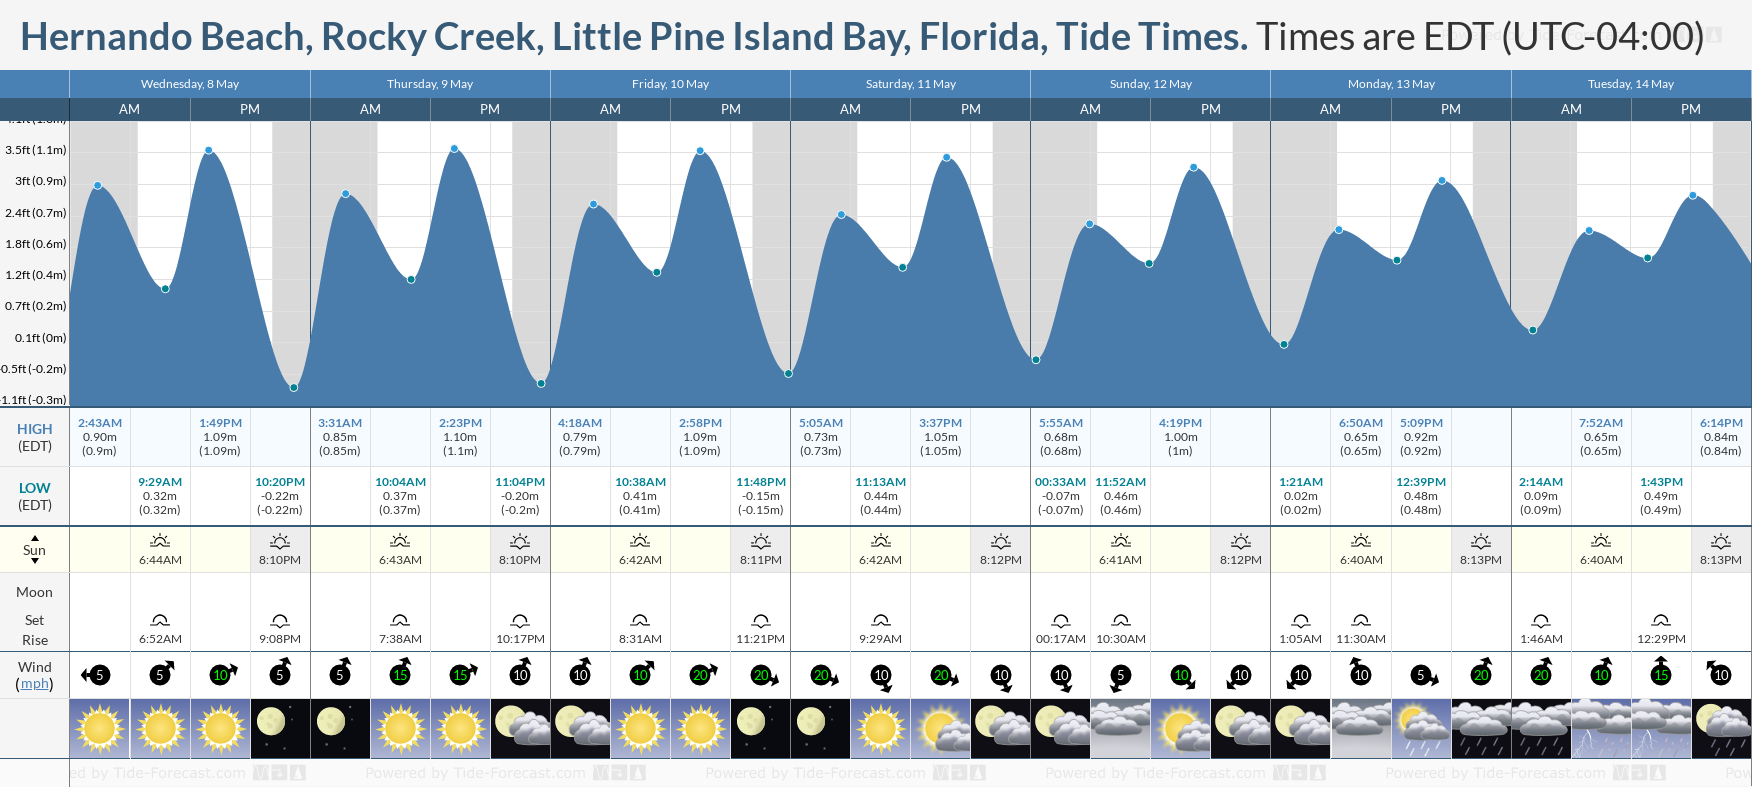 Hernando Beach, Rocky Creek, Little Pine Island Bay, Florida Tide Chart including high and low tide tide times for the next 7 days